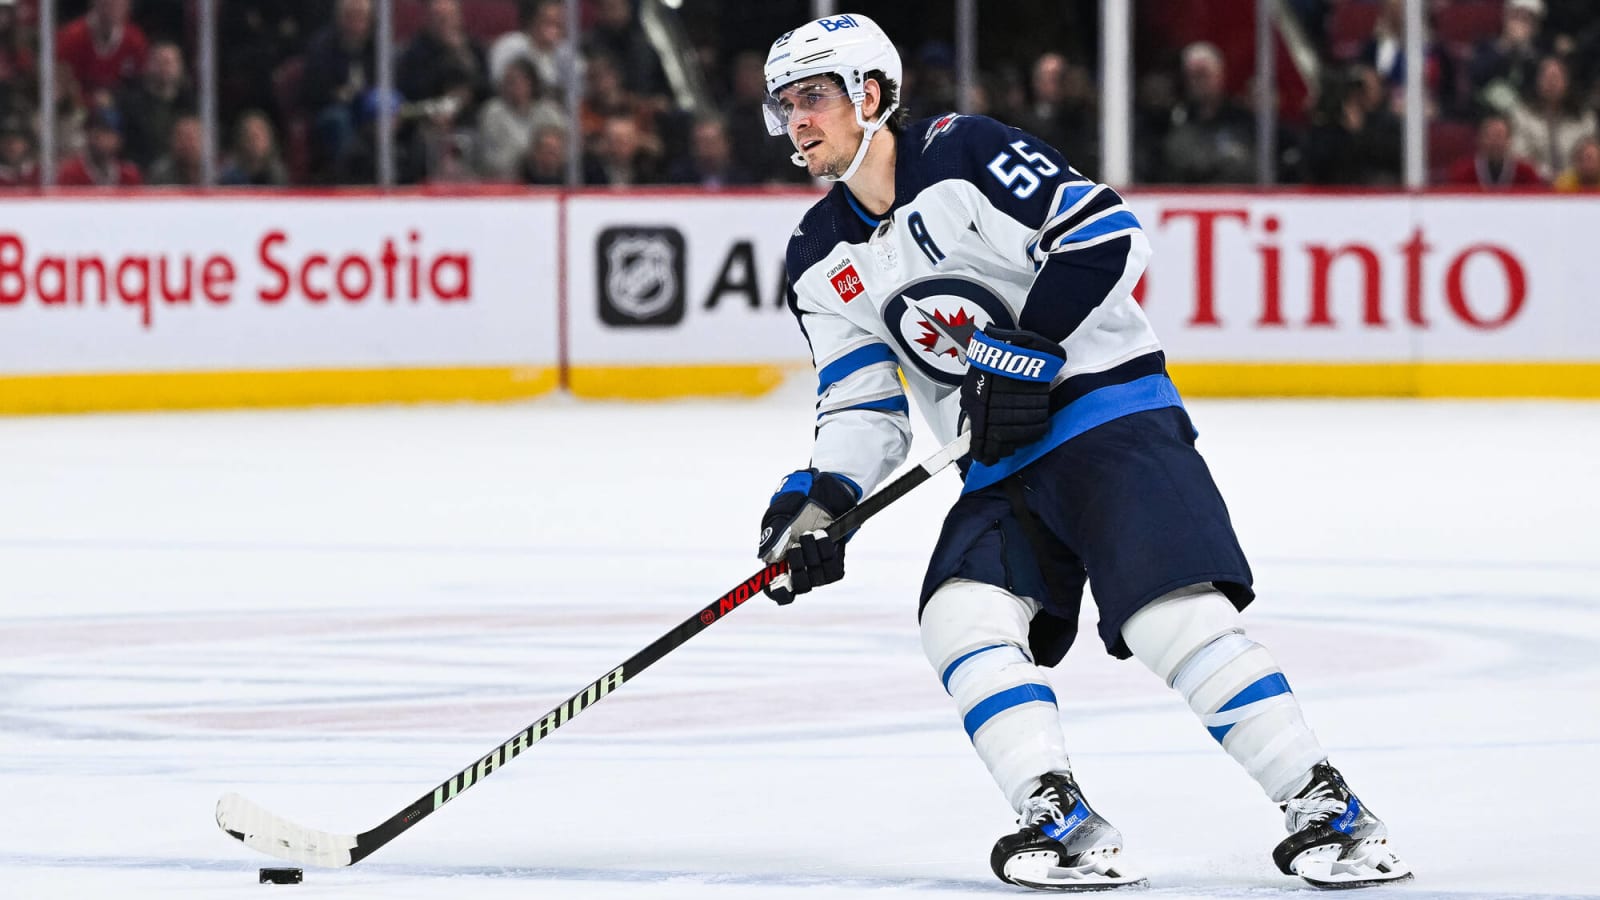 Jets’ center Mark Scheifele out day-to-day with lower-body injury